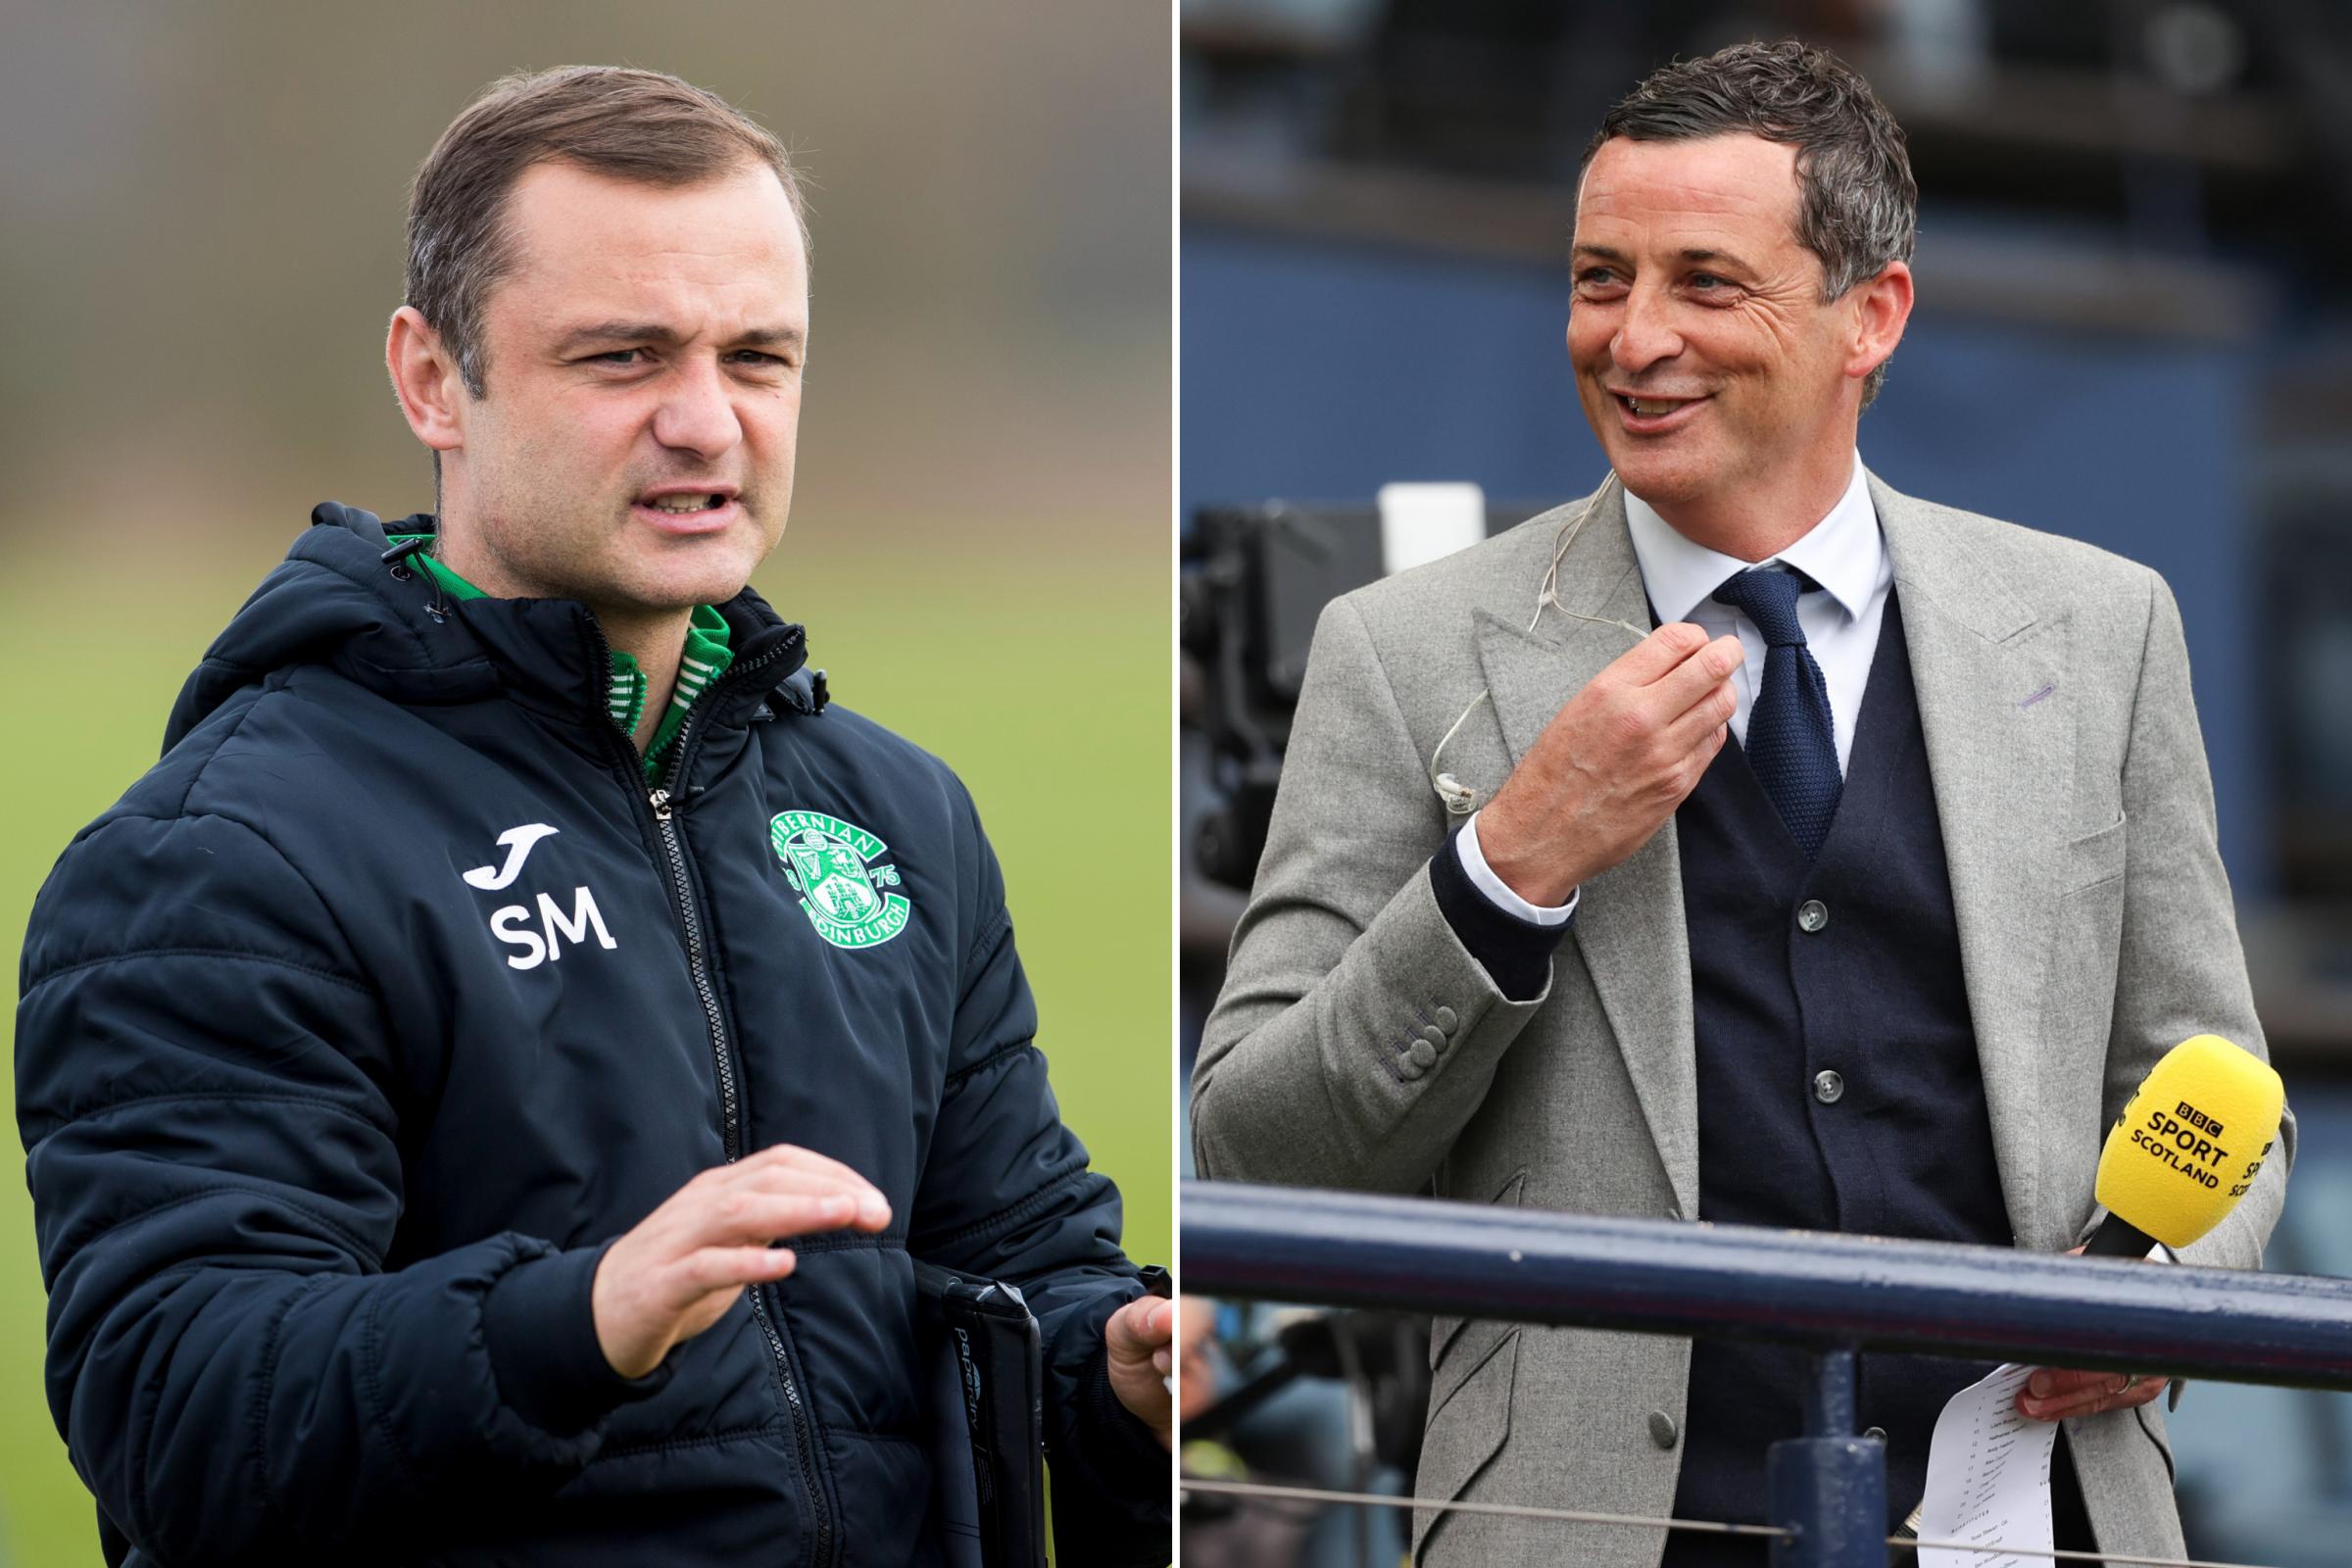 Jack Ross and Shaun Maloney battling it out for Dundee job as ex-Hibs duo look to get back into work